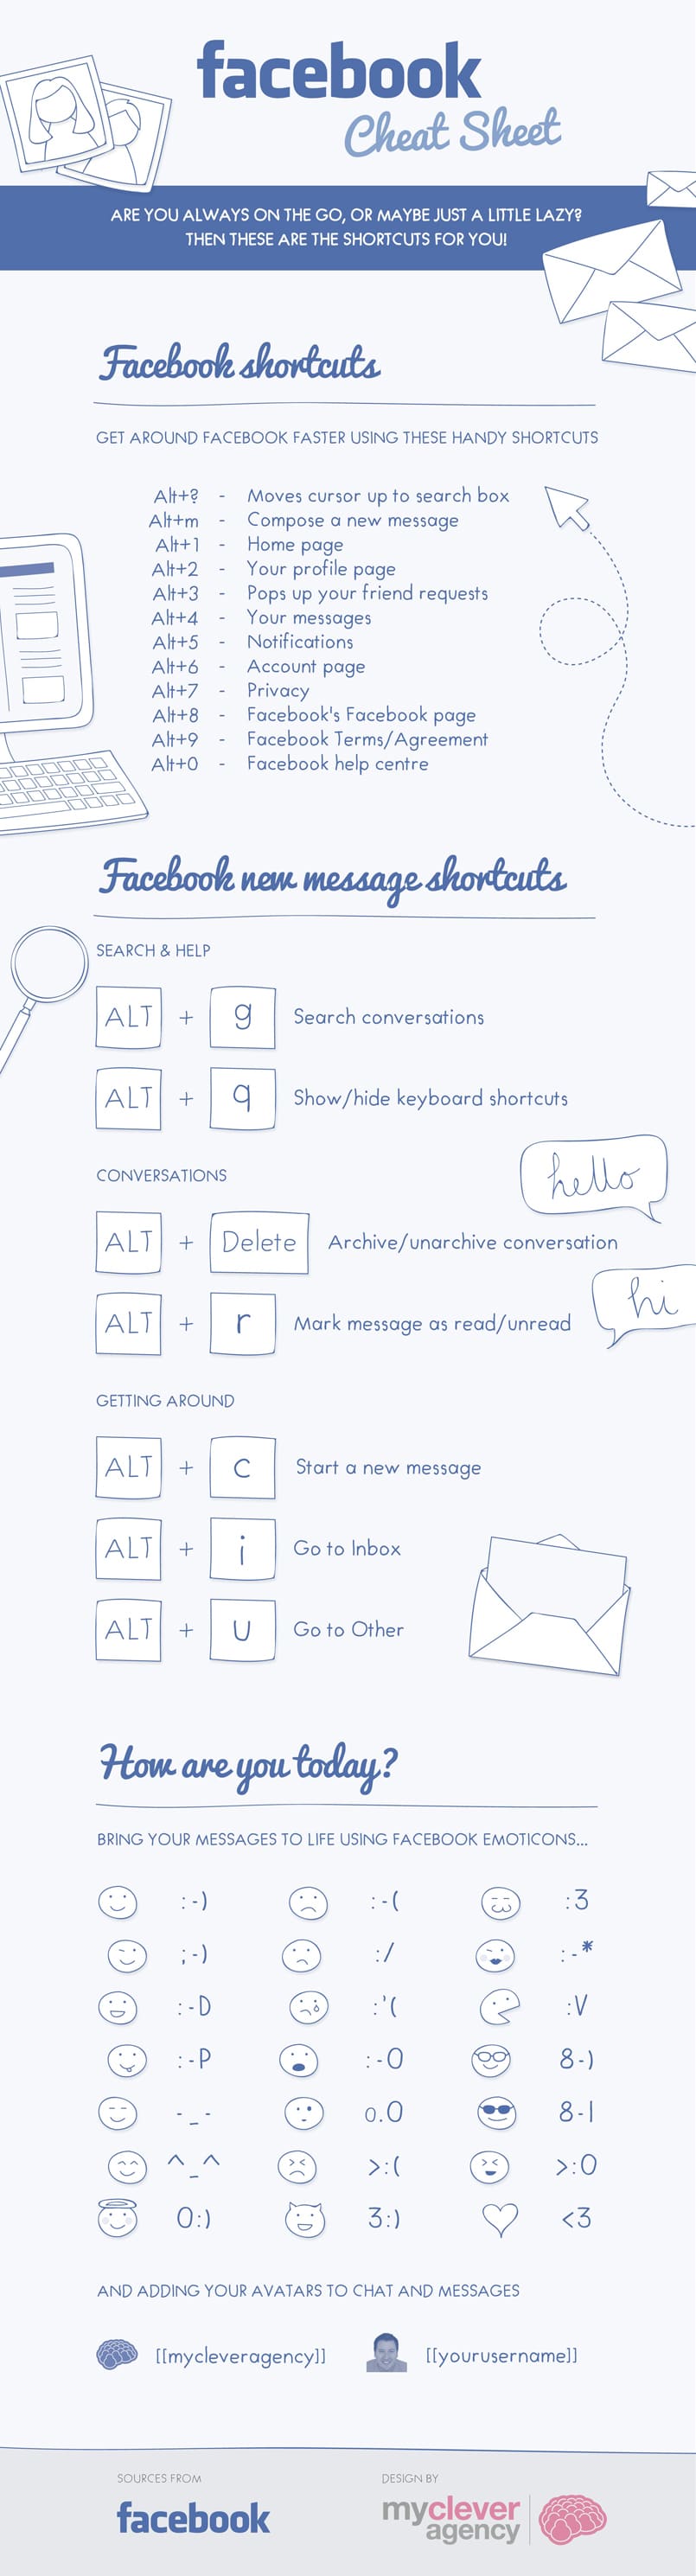 Network Faster With Facebook Shortcuts [Cheat Sheet]